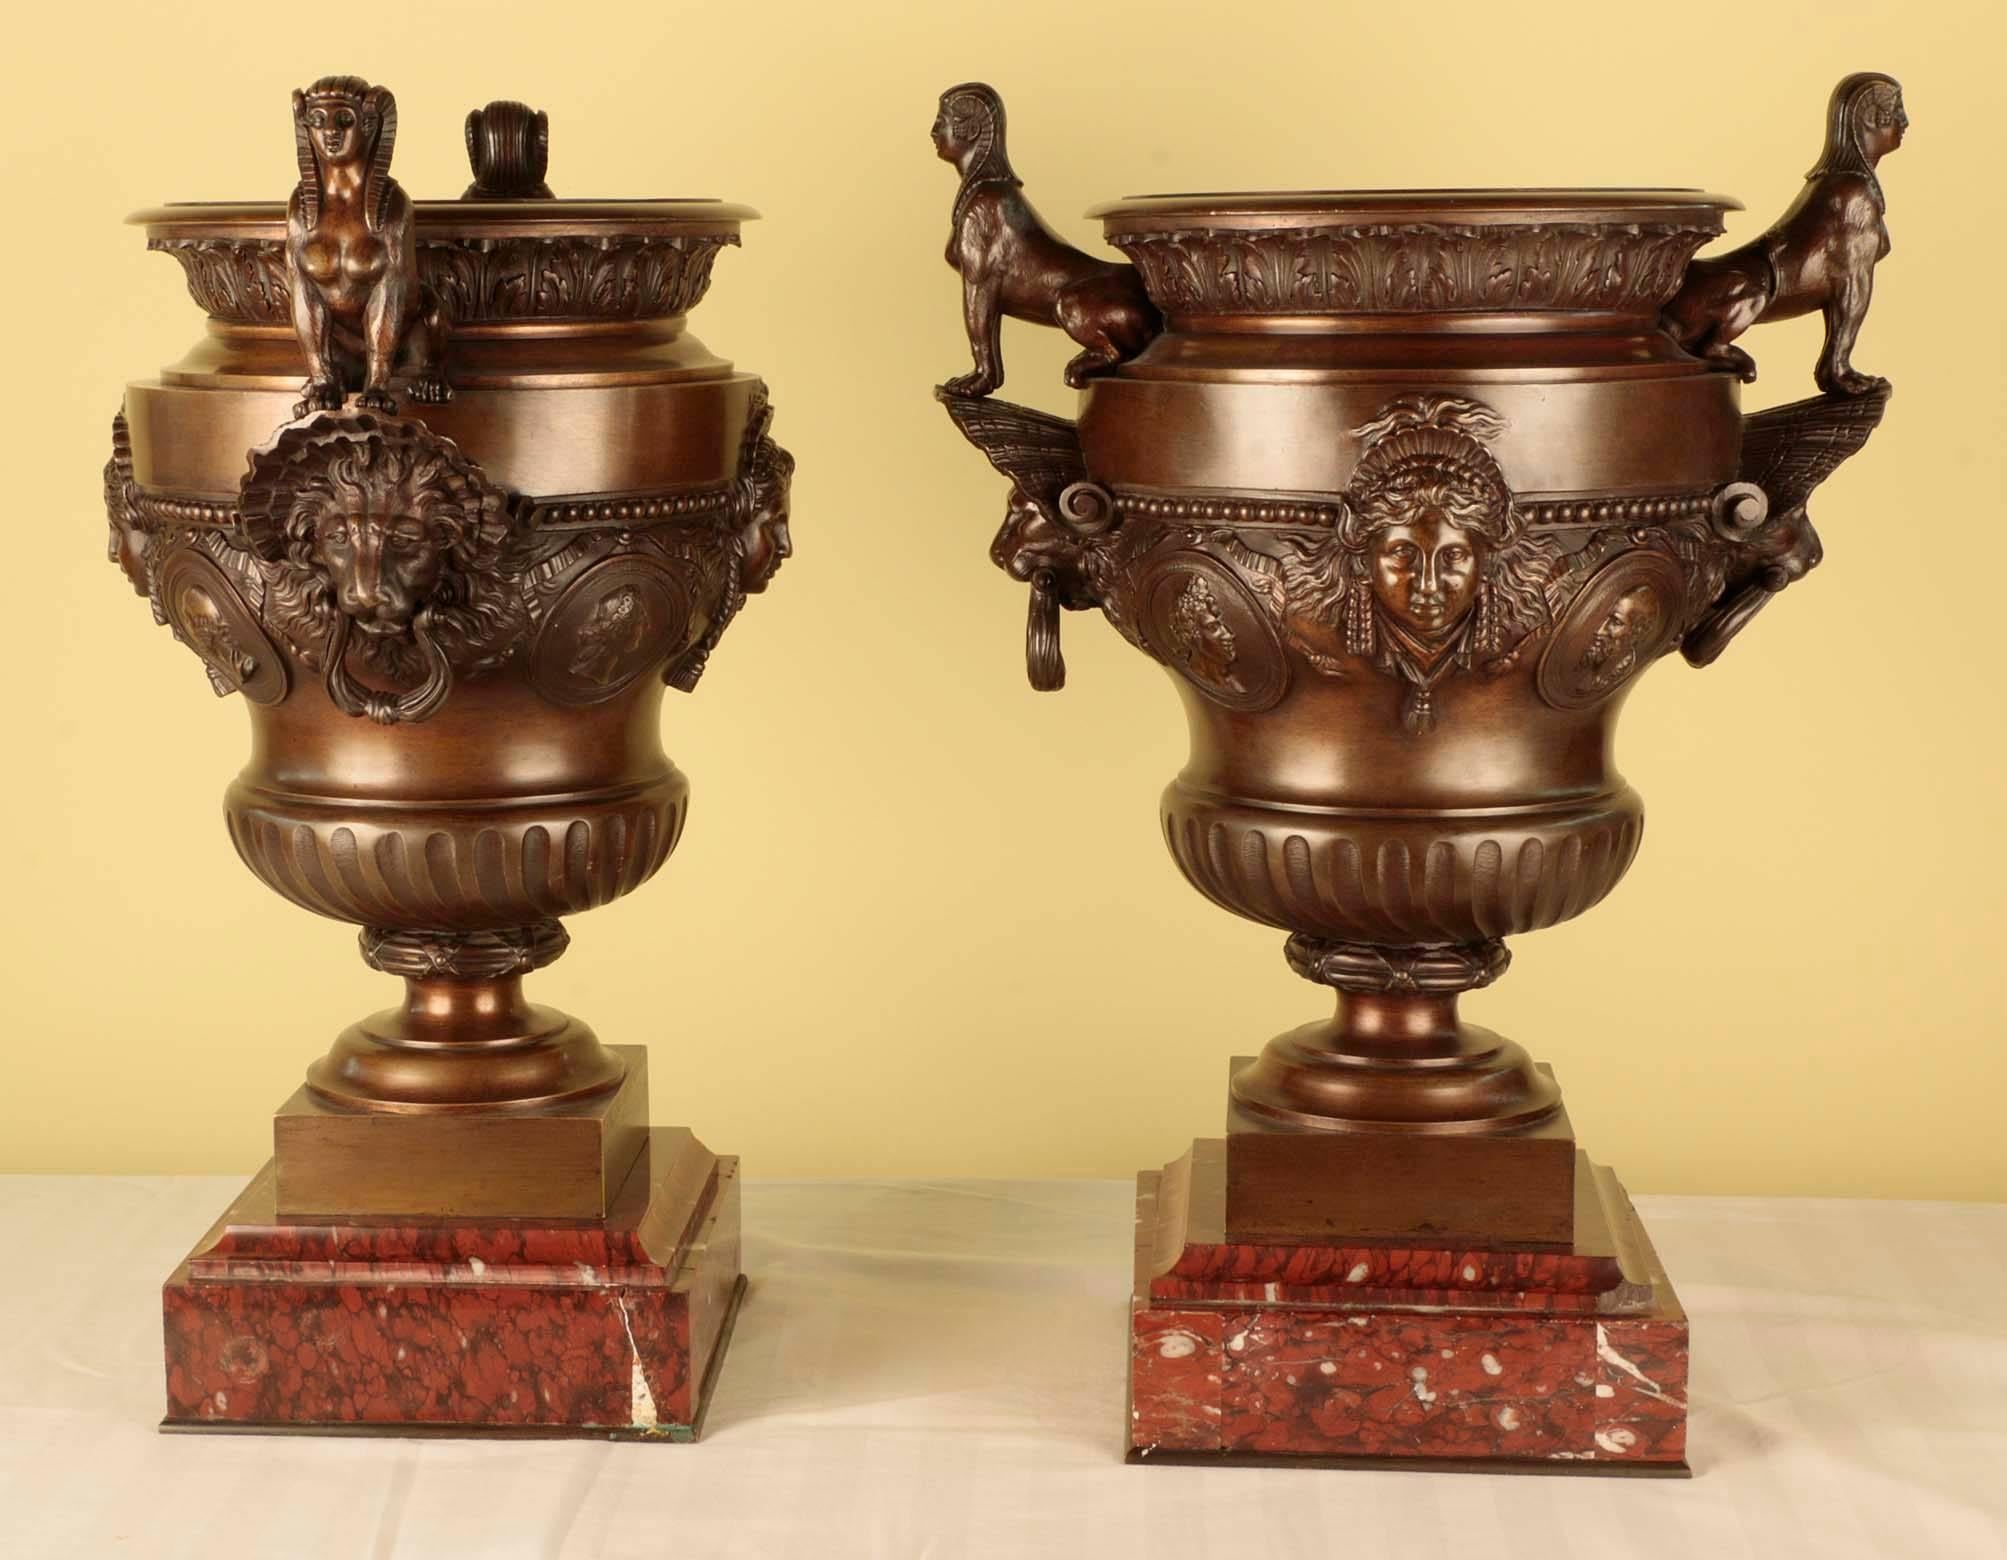 Matching pair of Napoleon III Empire style oiled bronze urns seated on red marble bases. Each urn decorated with facing sphinx resting on lions heads,
with busts of men and women in relief in the central band of the urns.
Pair of Napoleon III bronze